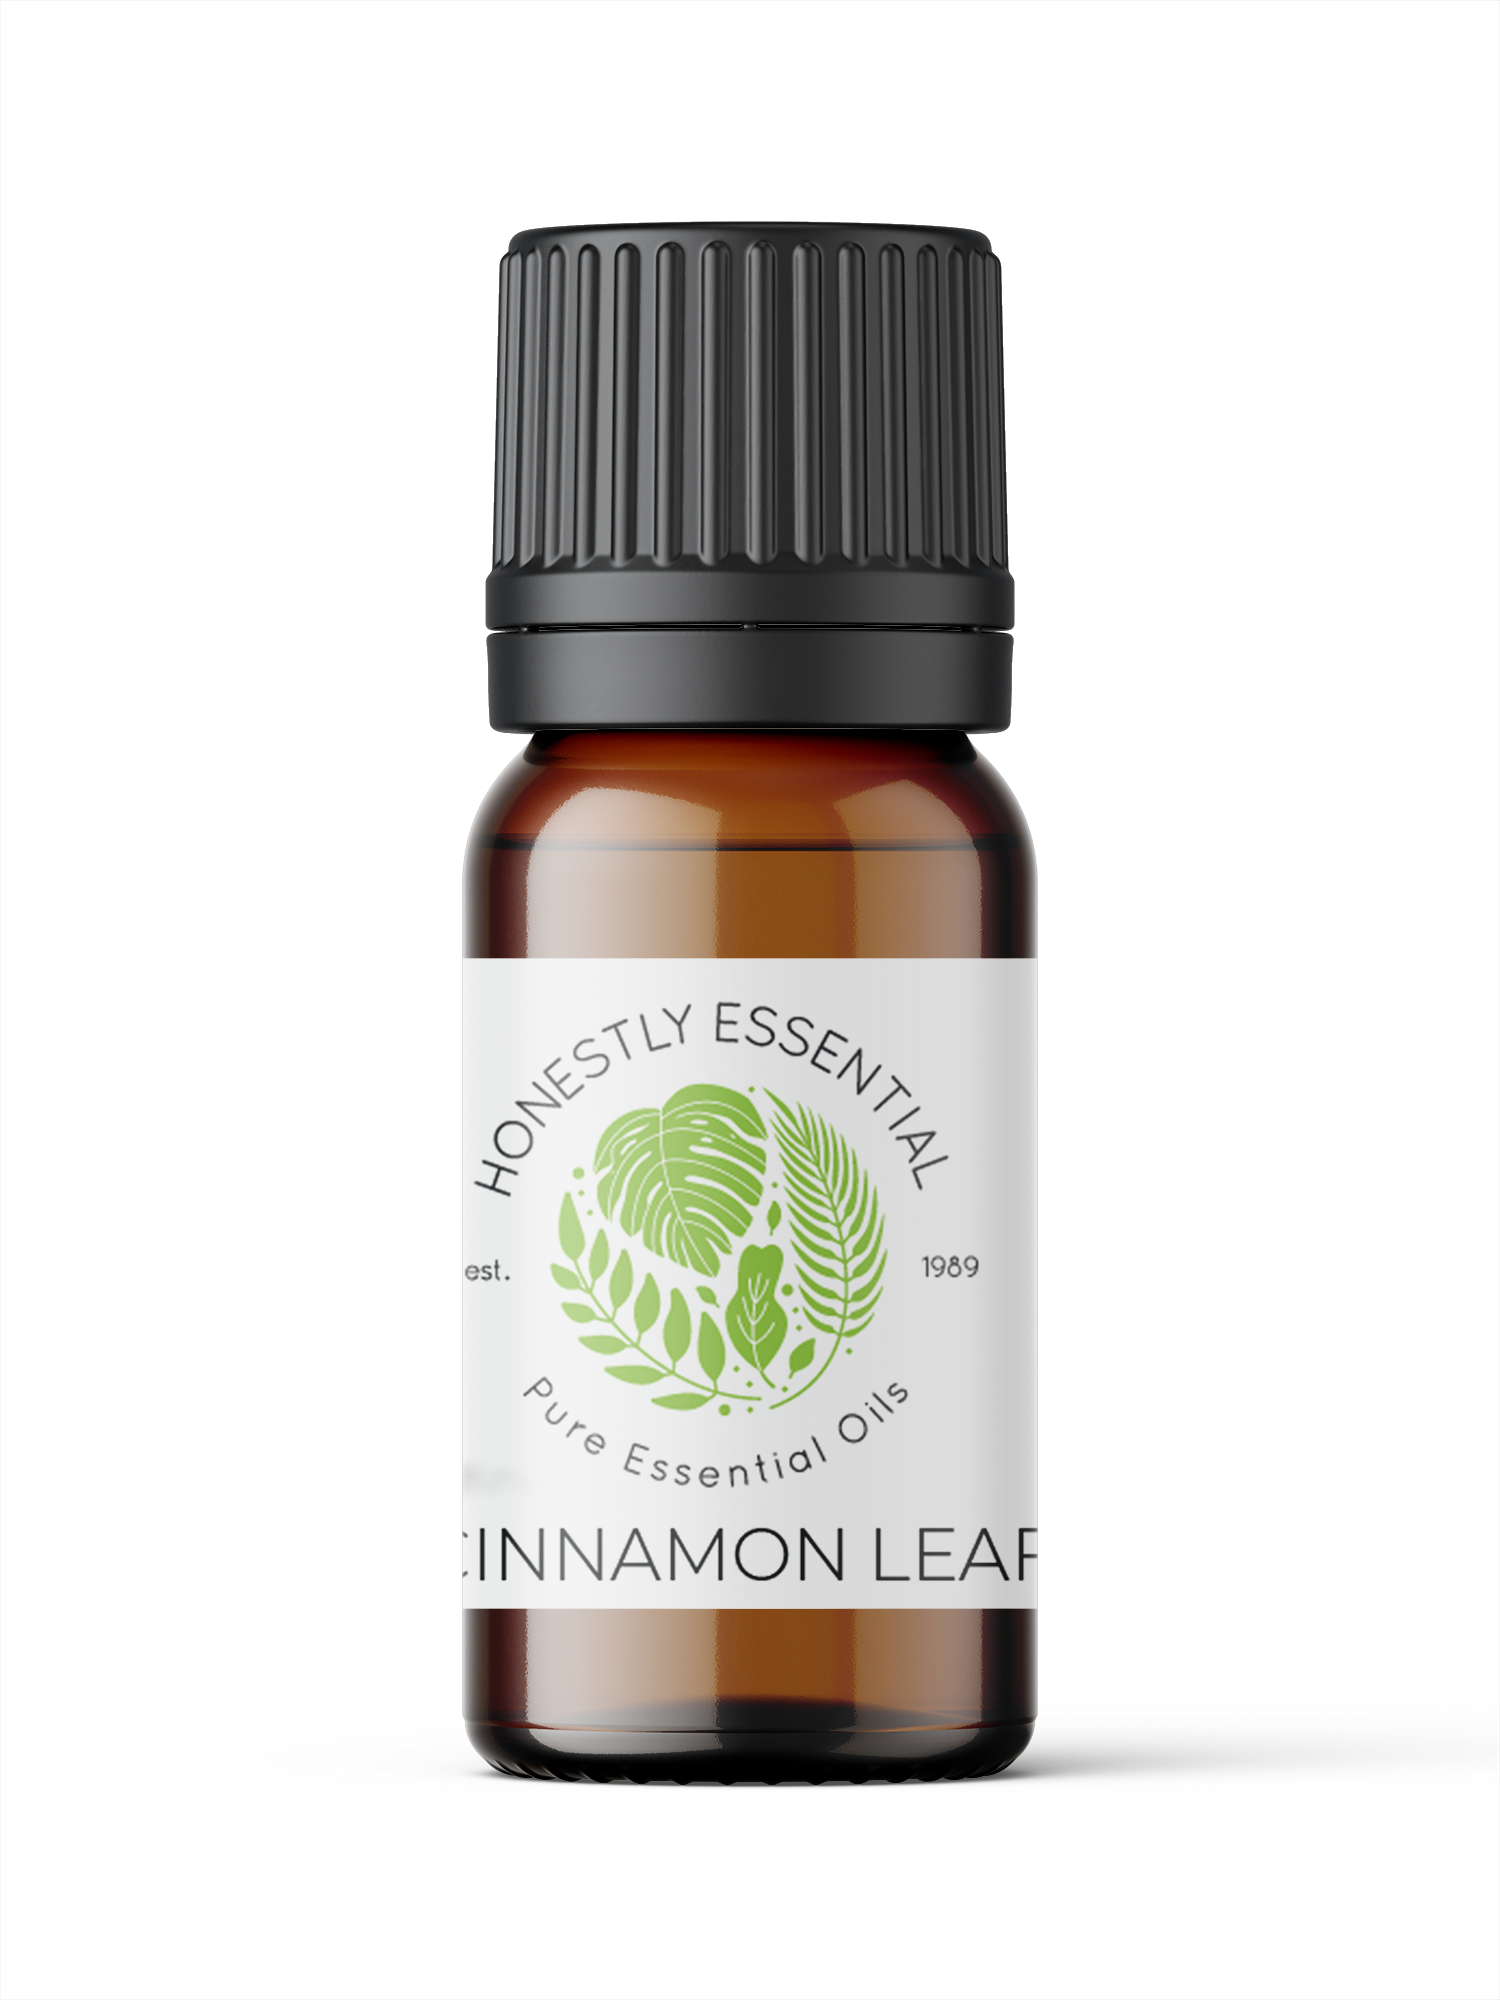 Cinnamon Leaf Essential Oil - Essential Oils | Honestly Essential Oils digestion, energy, immunity, Insect and Pest Repellent, pain, pain reliever, spice, spice essential oil, spices, tree, t